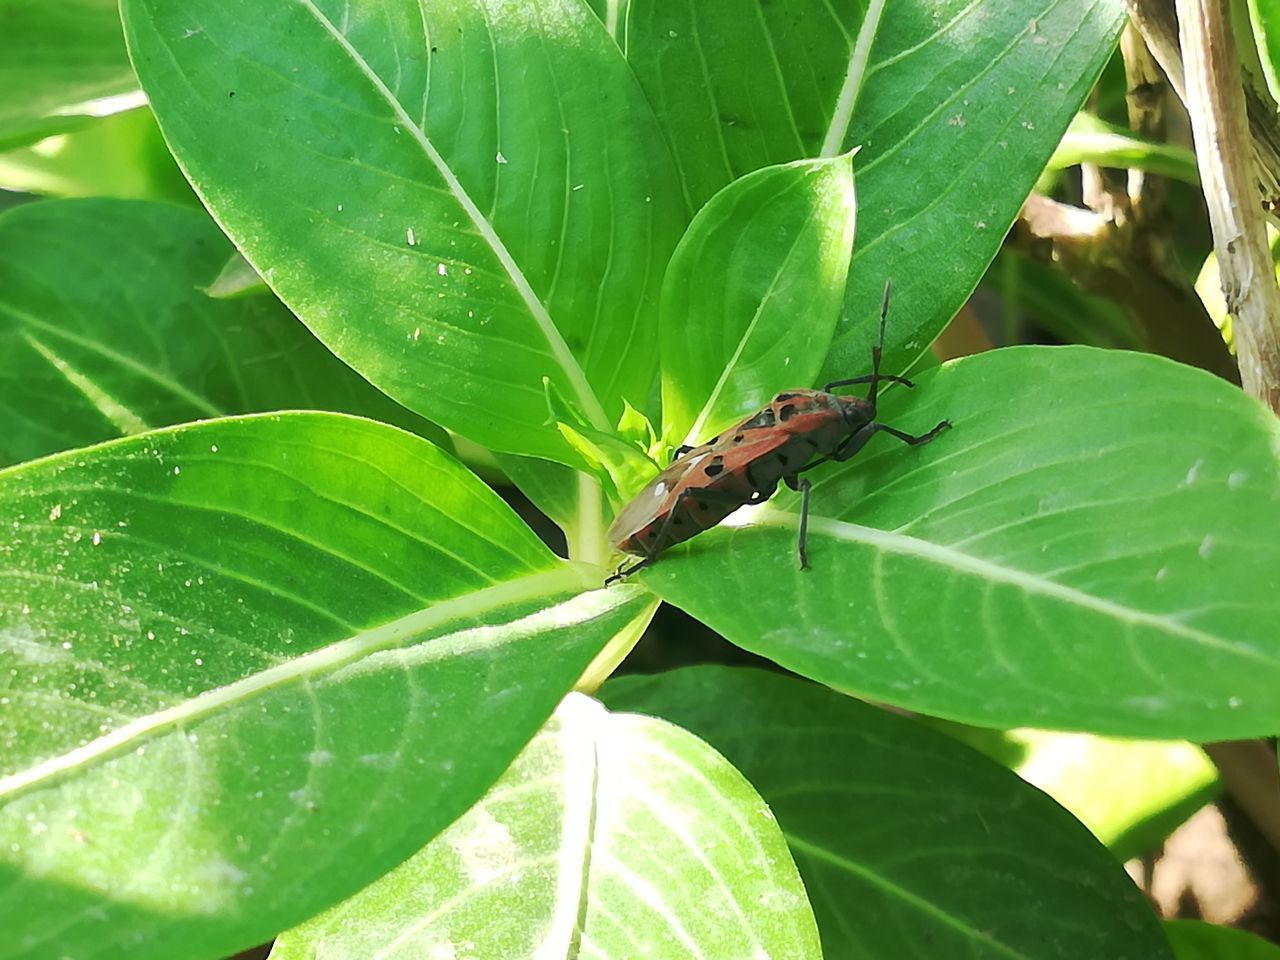 CLOSE-UP OF INSECT ON PLANT